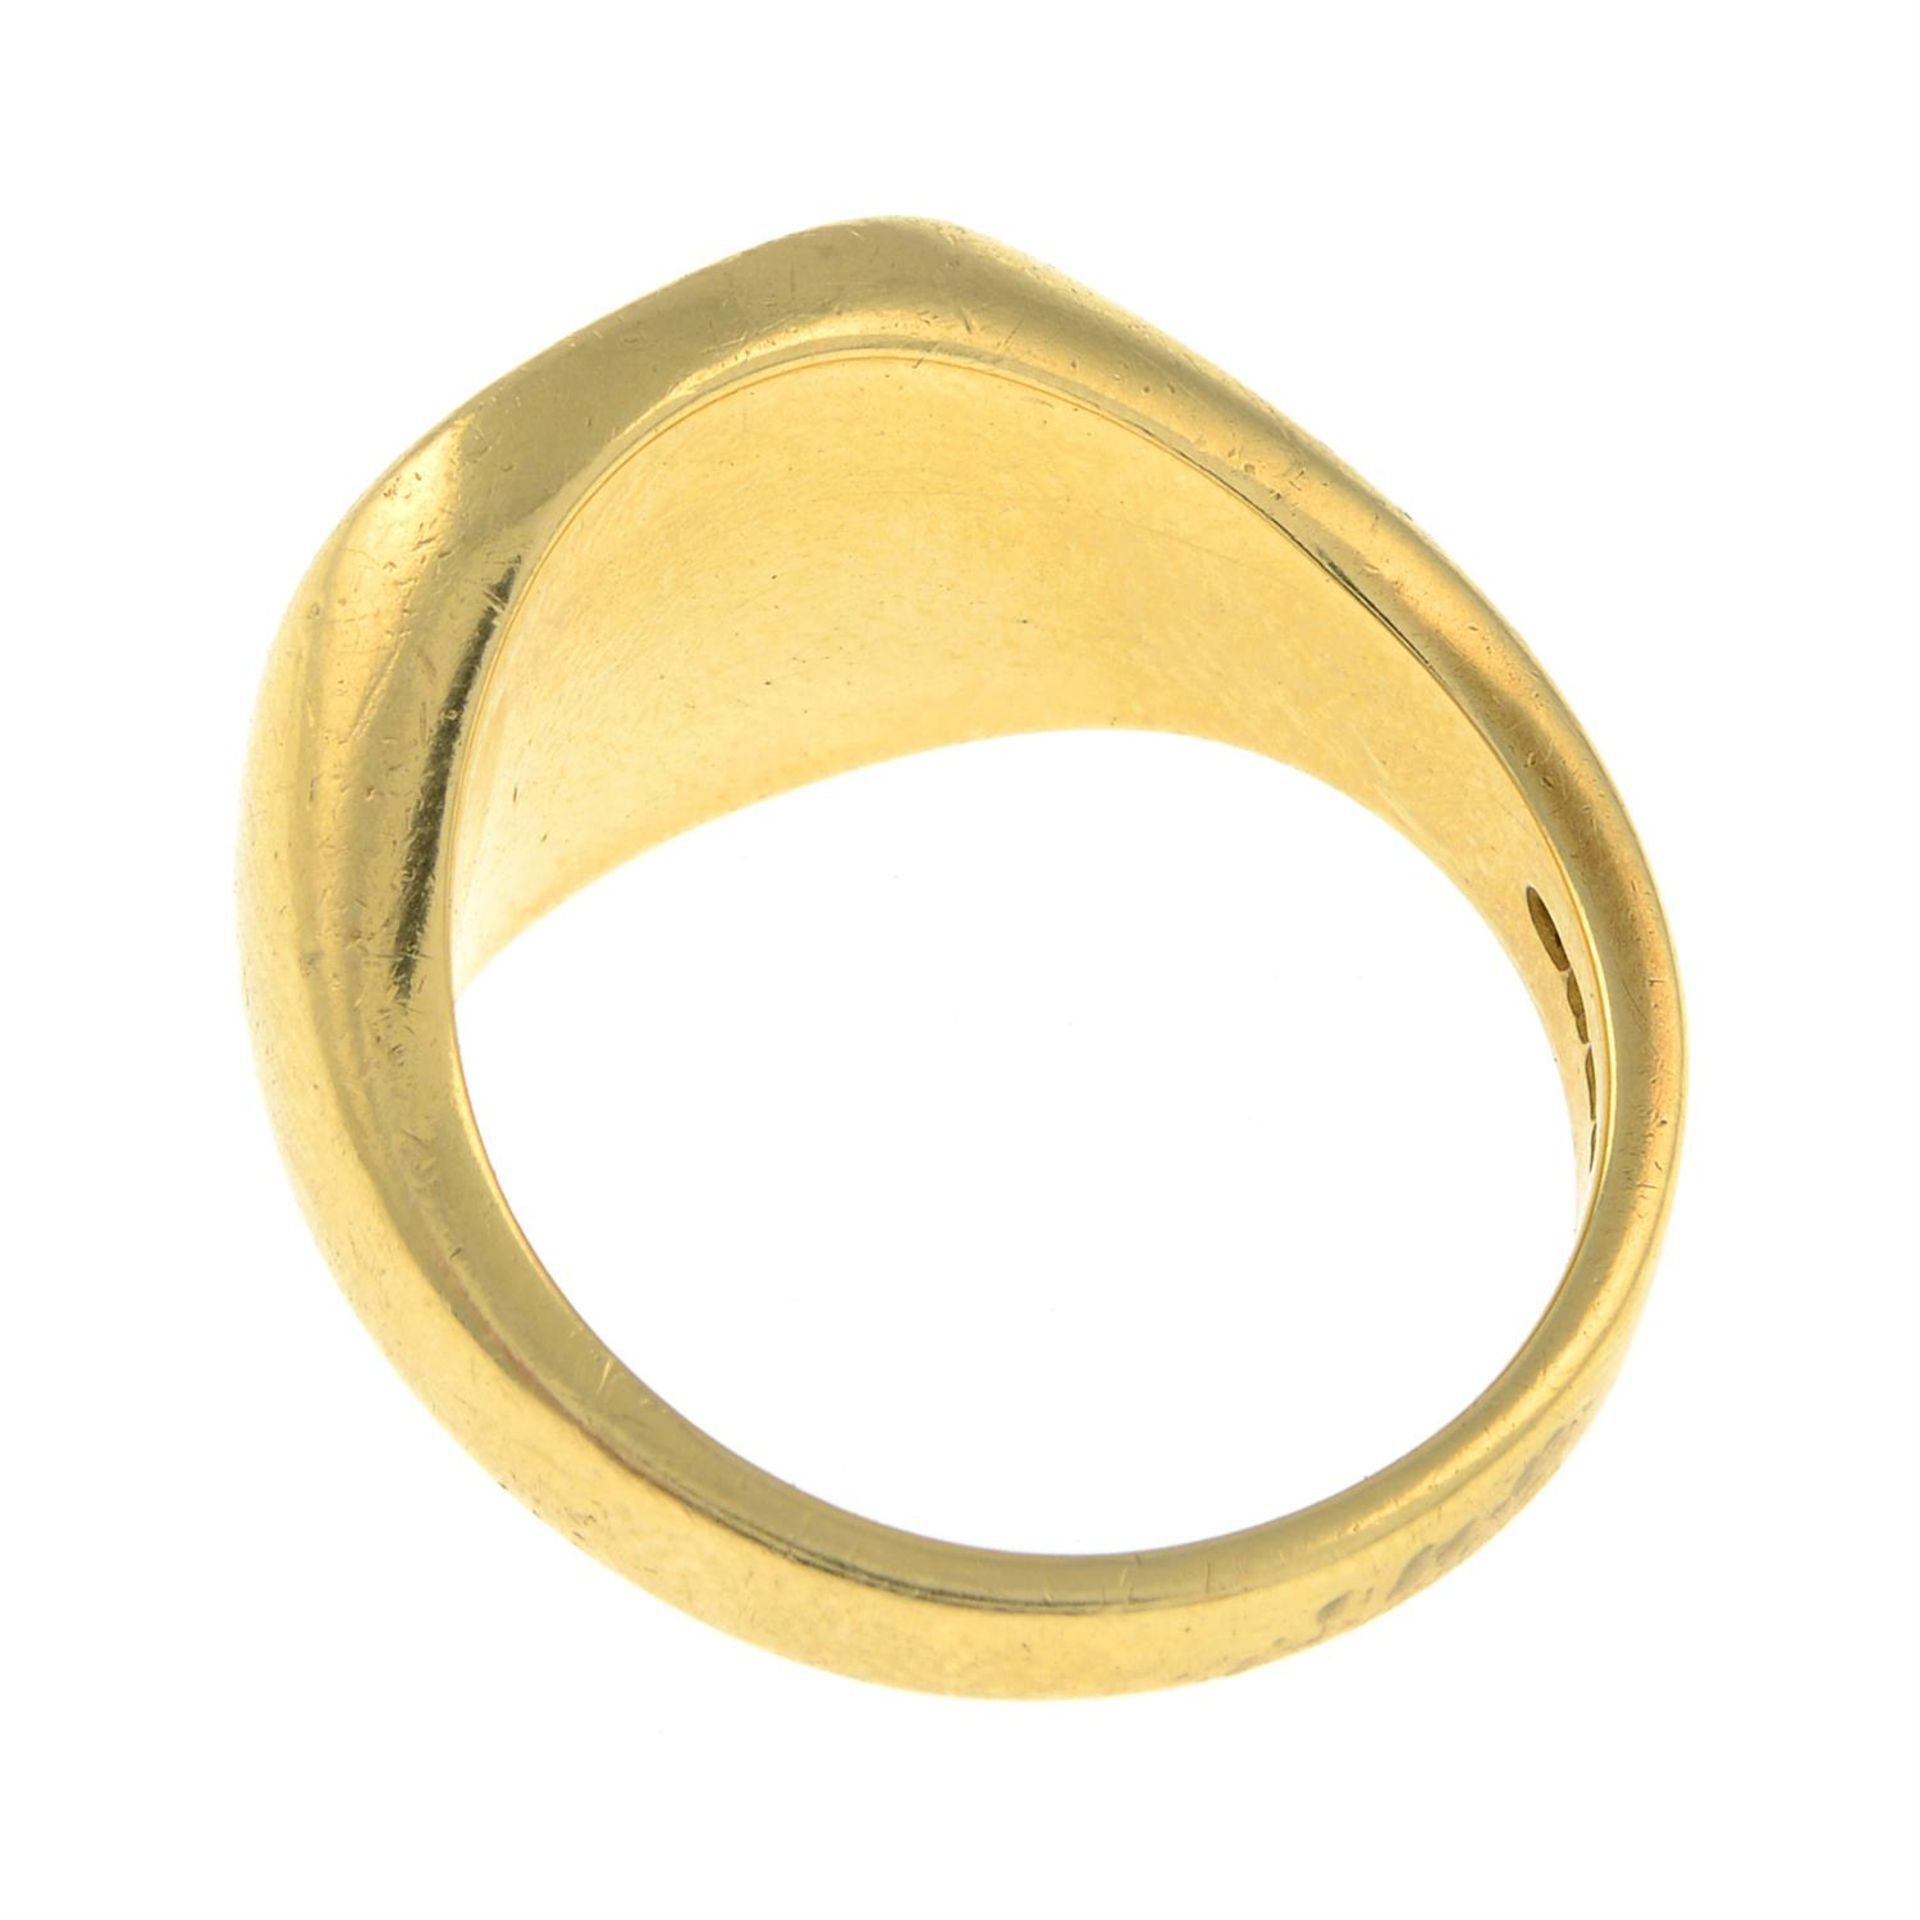 (25821) An 18ct gold signet ring. - Image 2 of 2